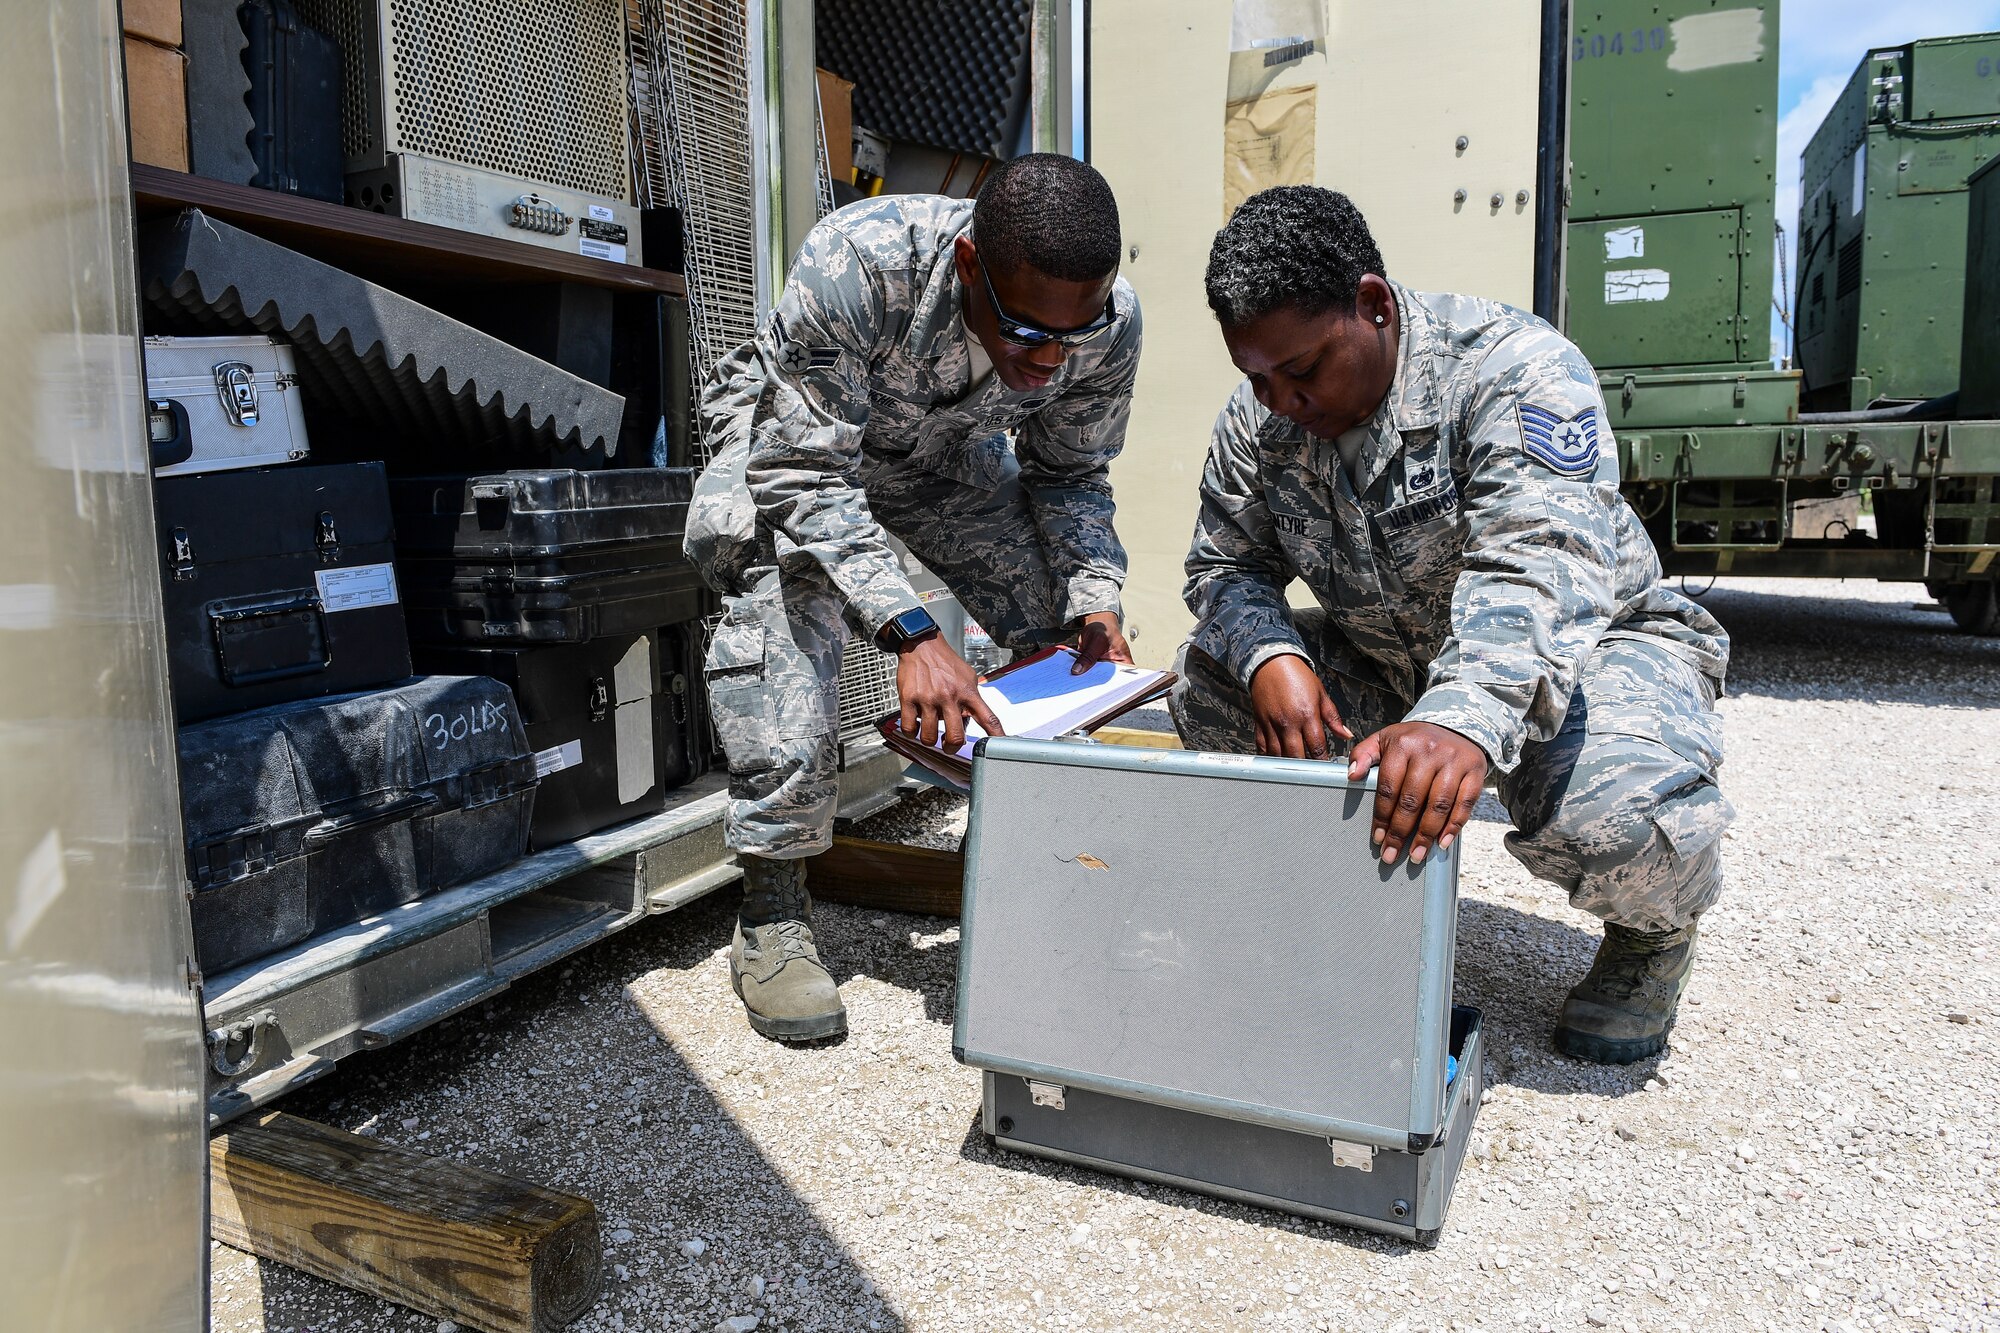 Two logistics Airmen inspect a piece of equipment from a storage area at Incirlik Air Base, Turkey